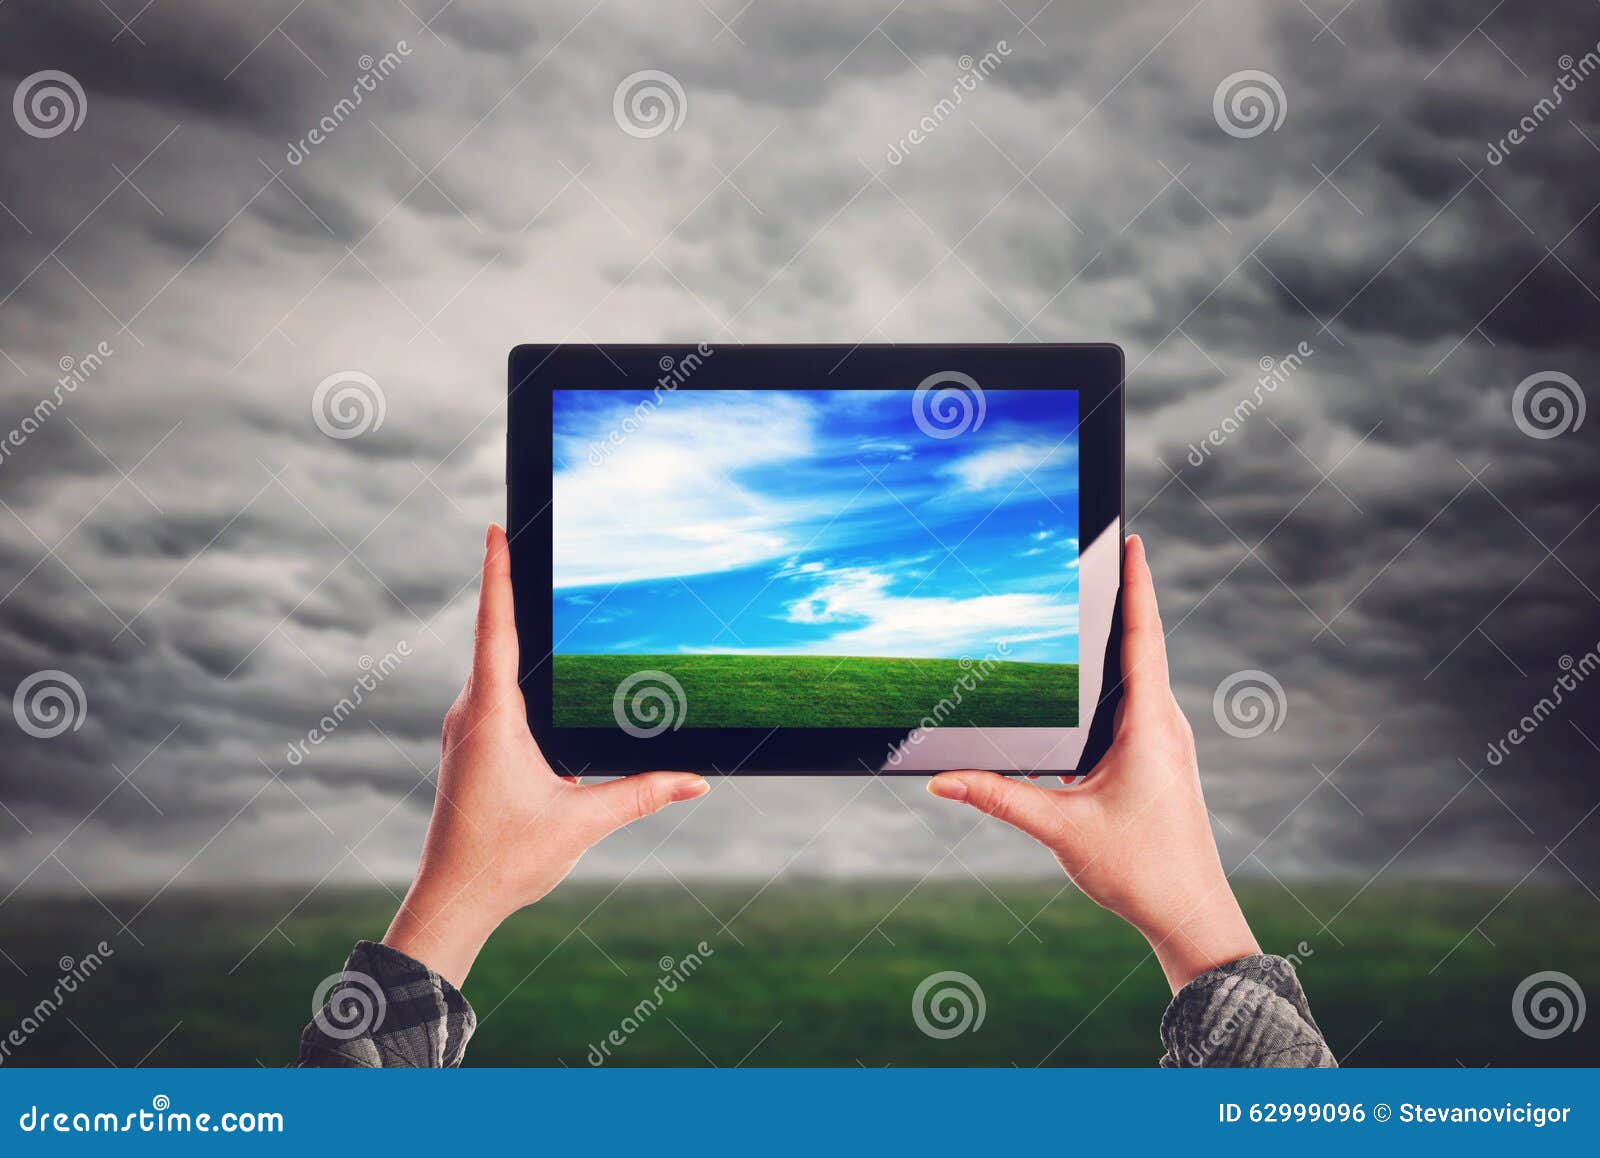 environmentalist with digital tablet computer